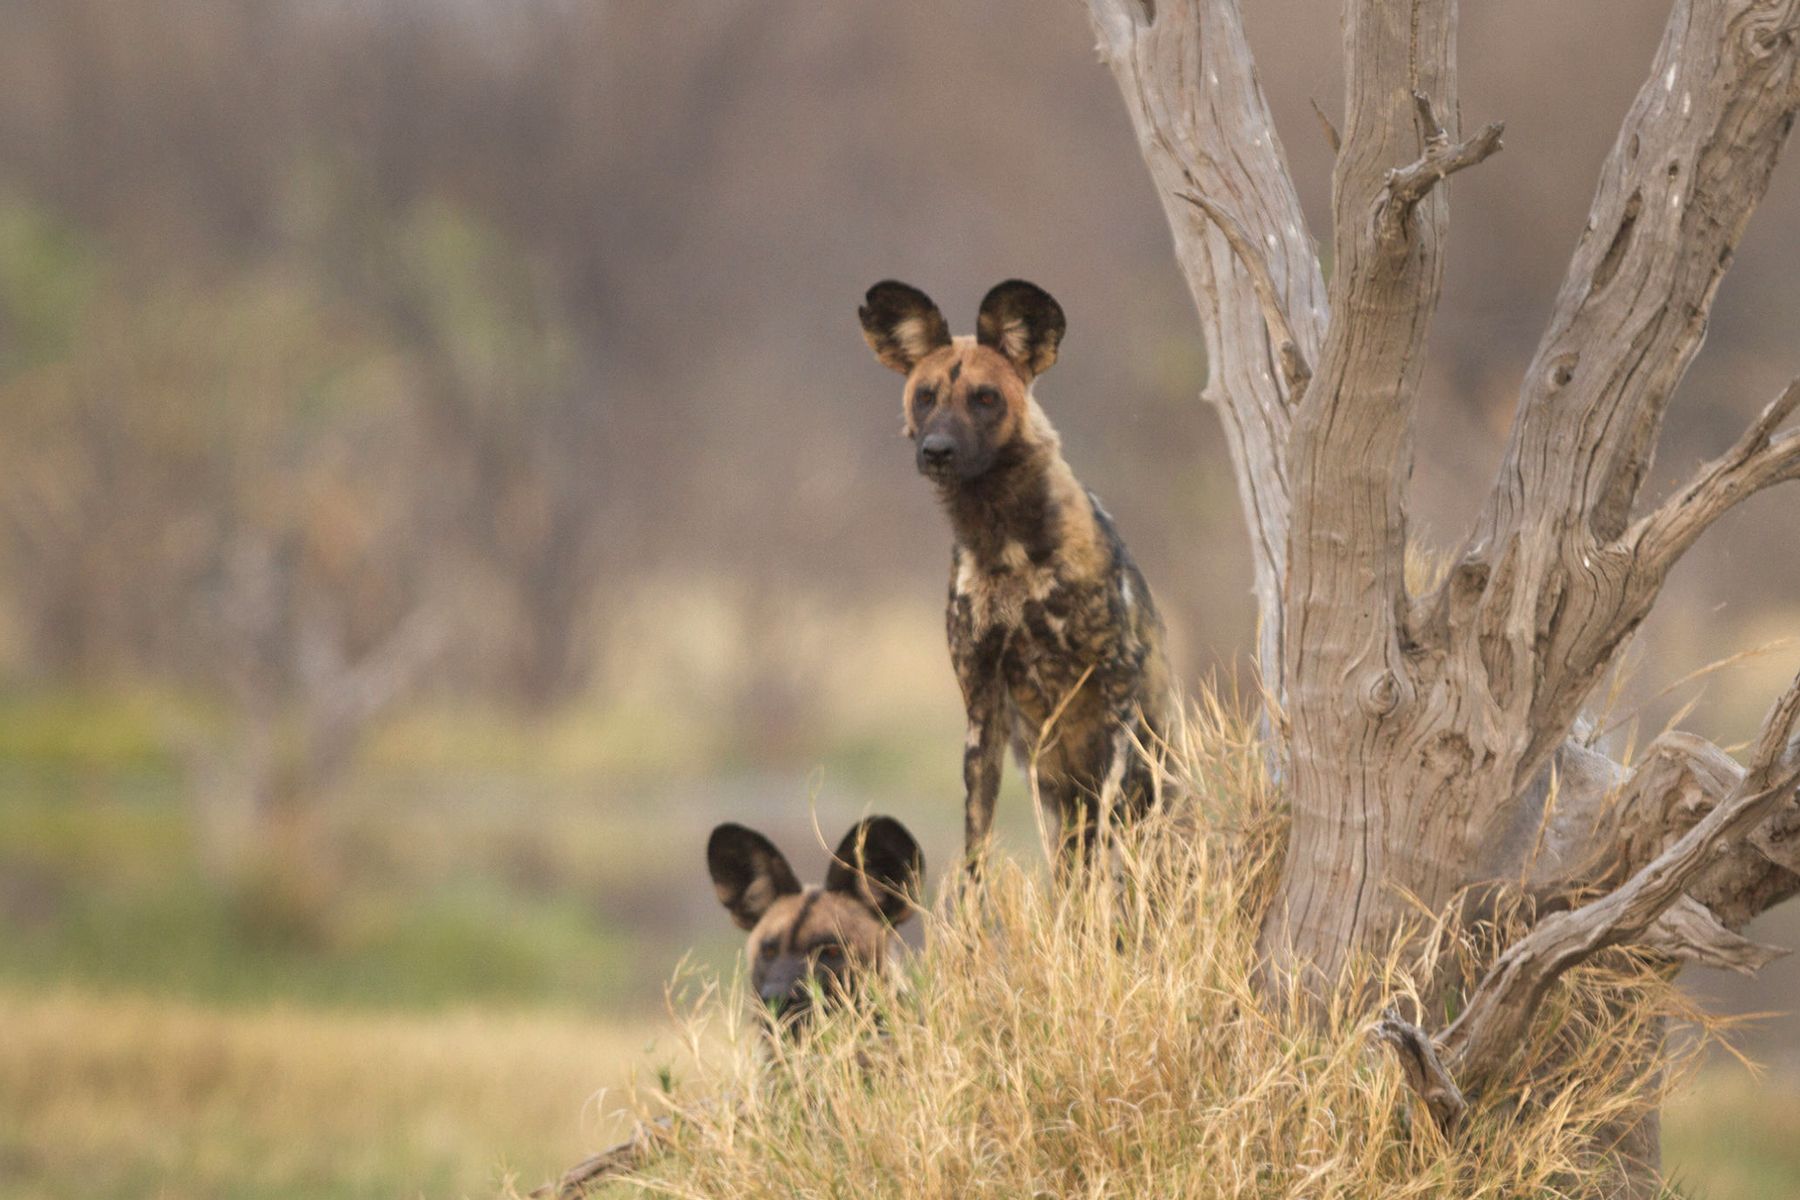 Wild Dogs peering curiously at photosafari guests